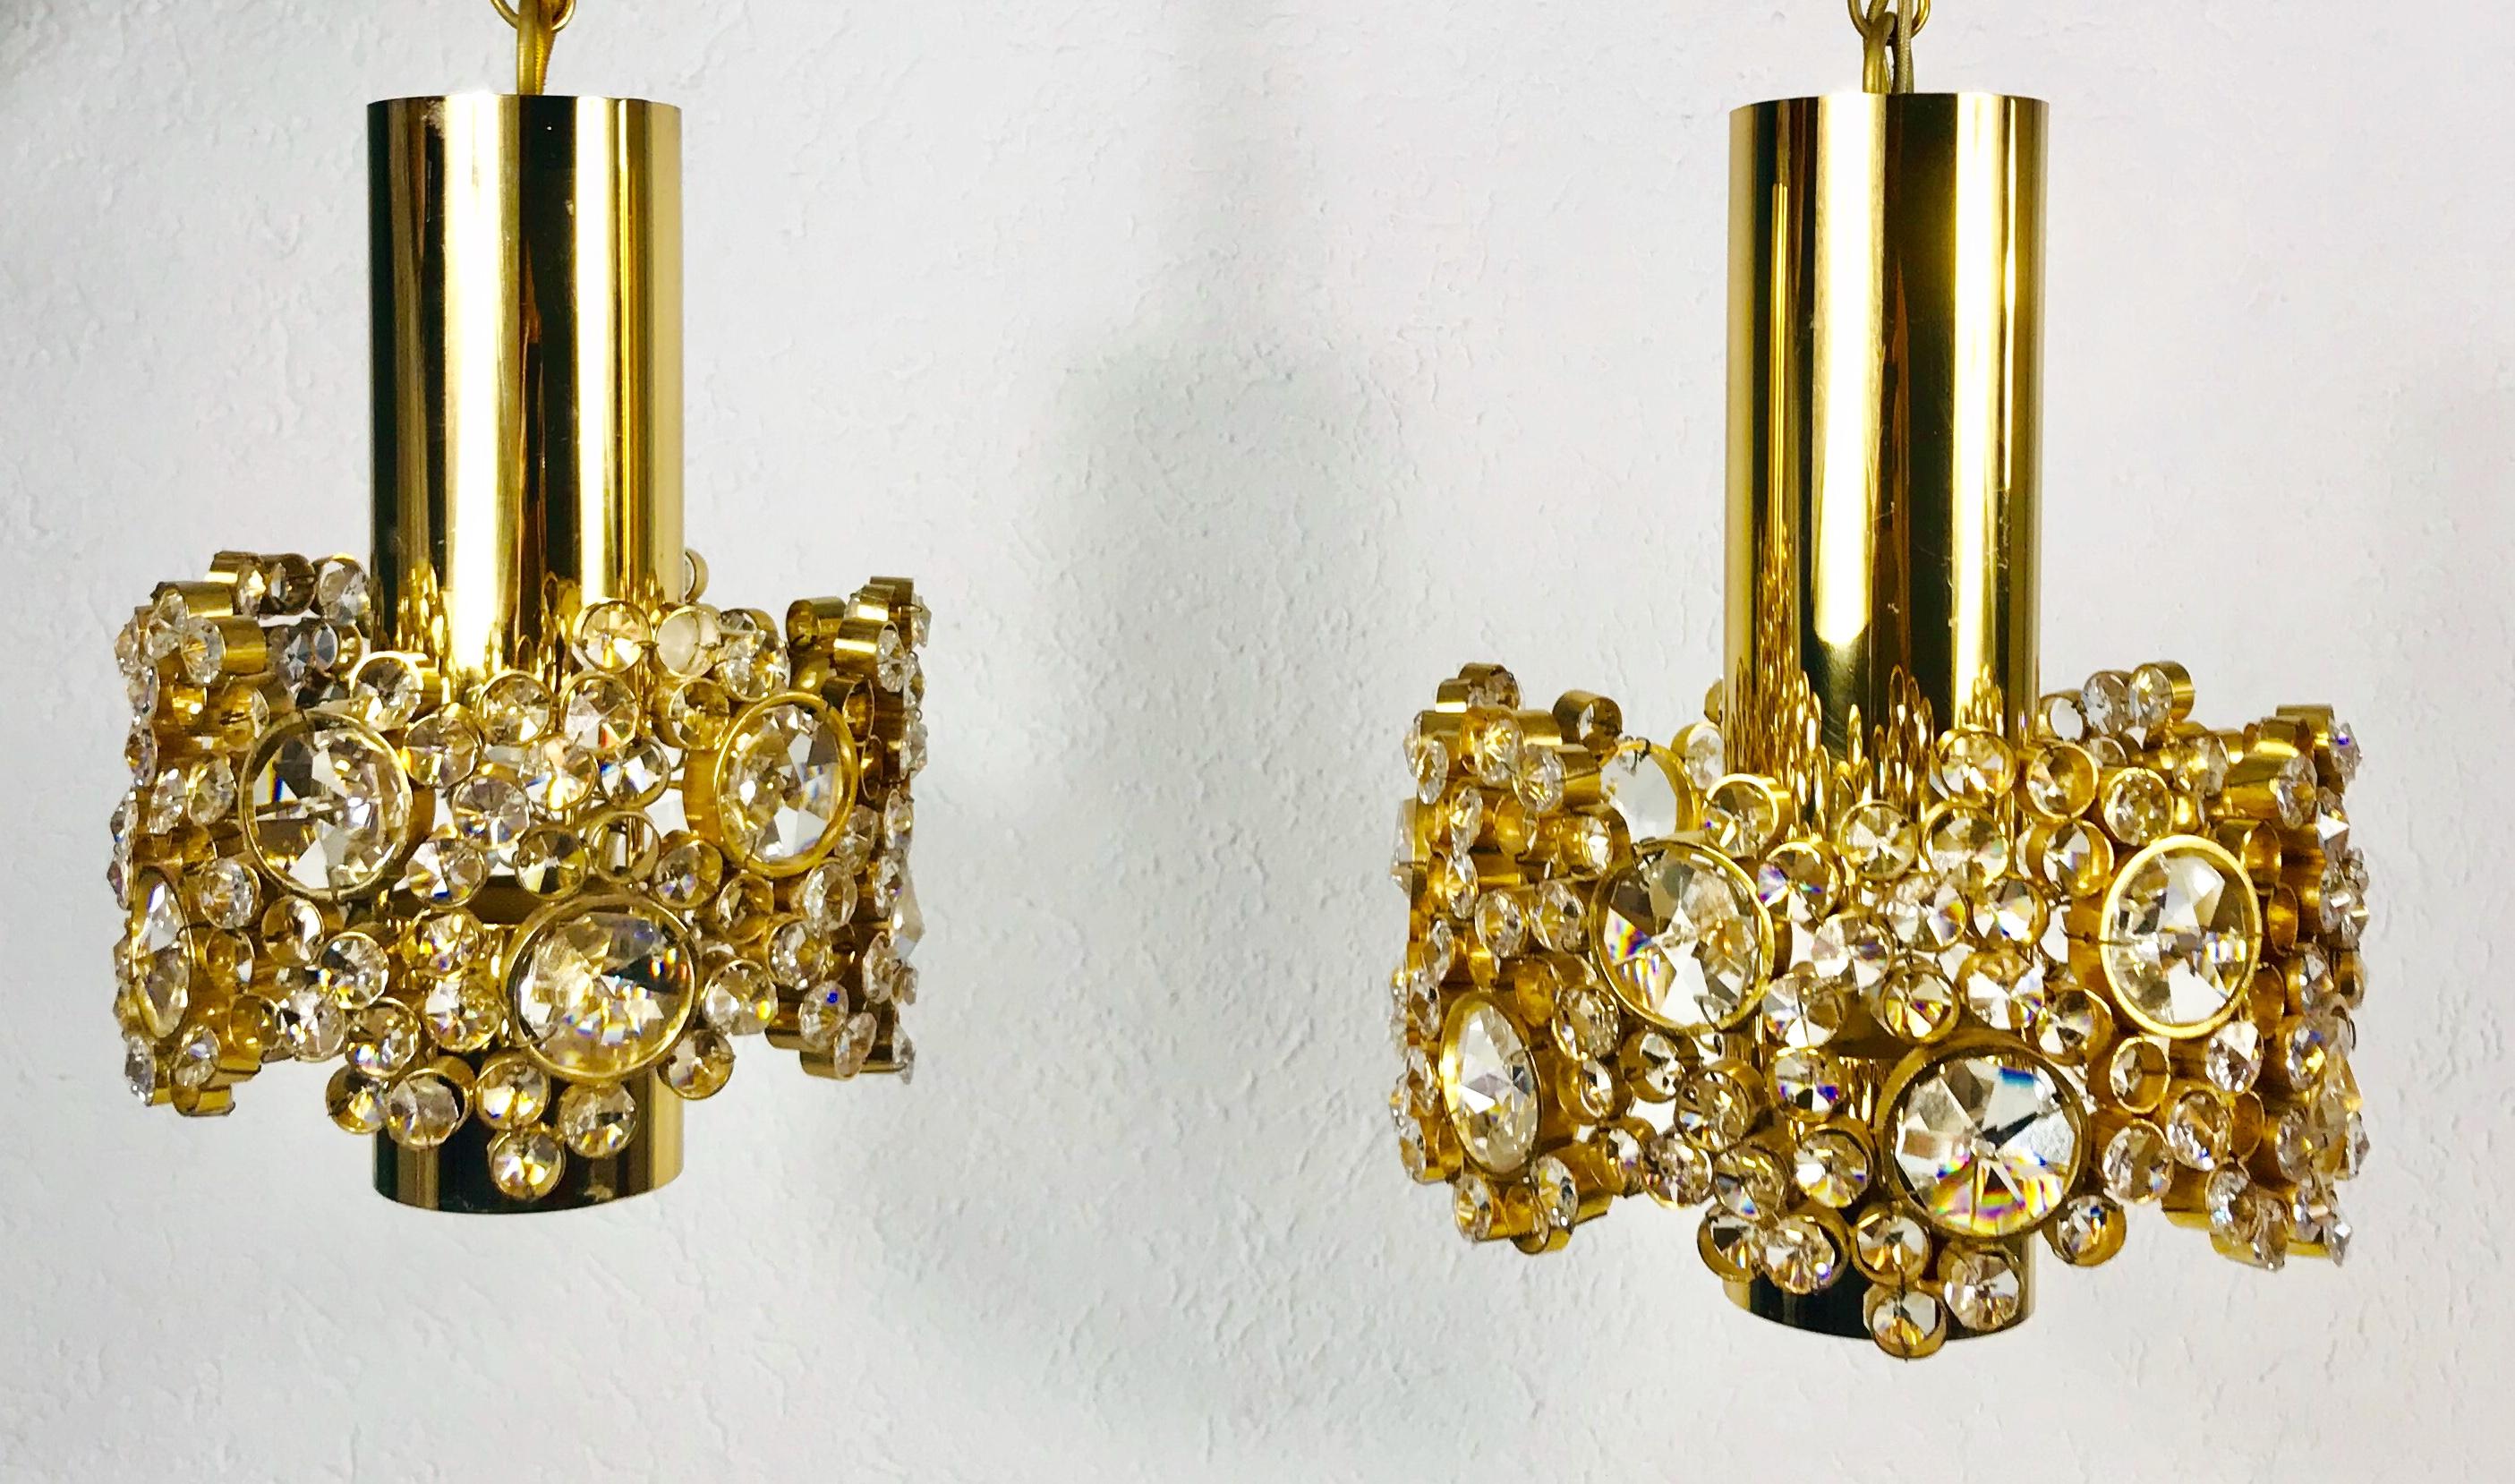 An extraordinary pair of pendant lamps by Palwa made in Germany in the 1970s. The lamps have a very elegant design. They are made in the period of Hollywood Regency. Round Gilt brass body with one E27 socket. The socket is surrounded with very